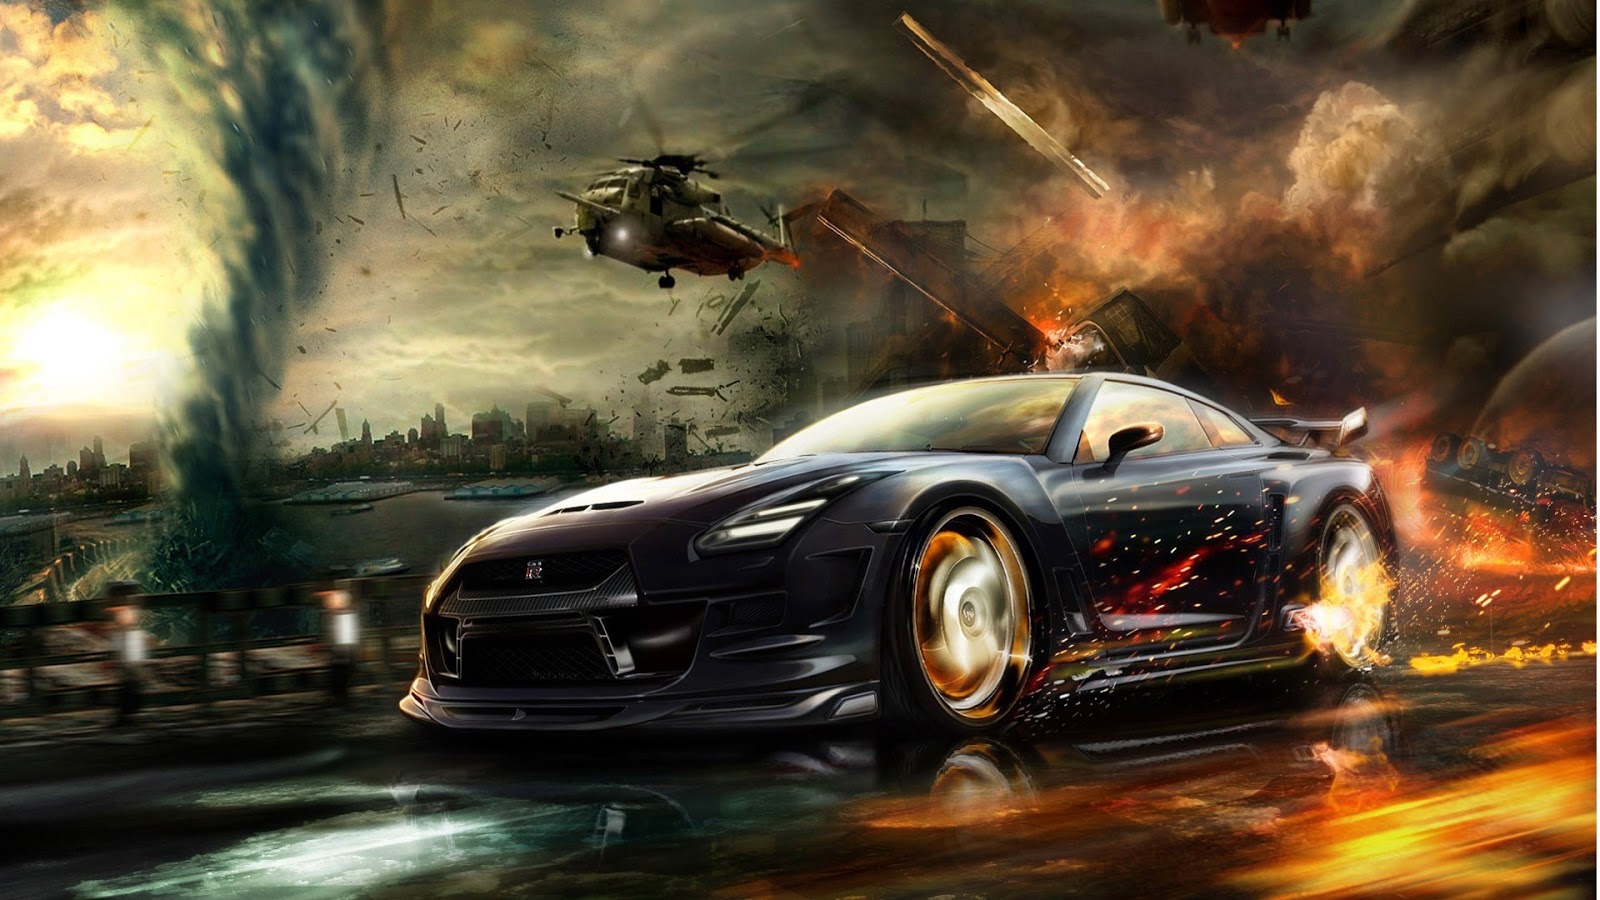 Ultra HD Wallpaper 3d Image Pictures Cars